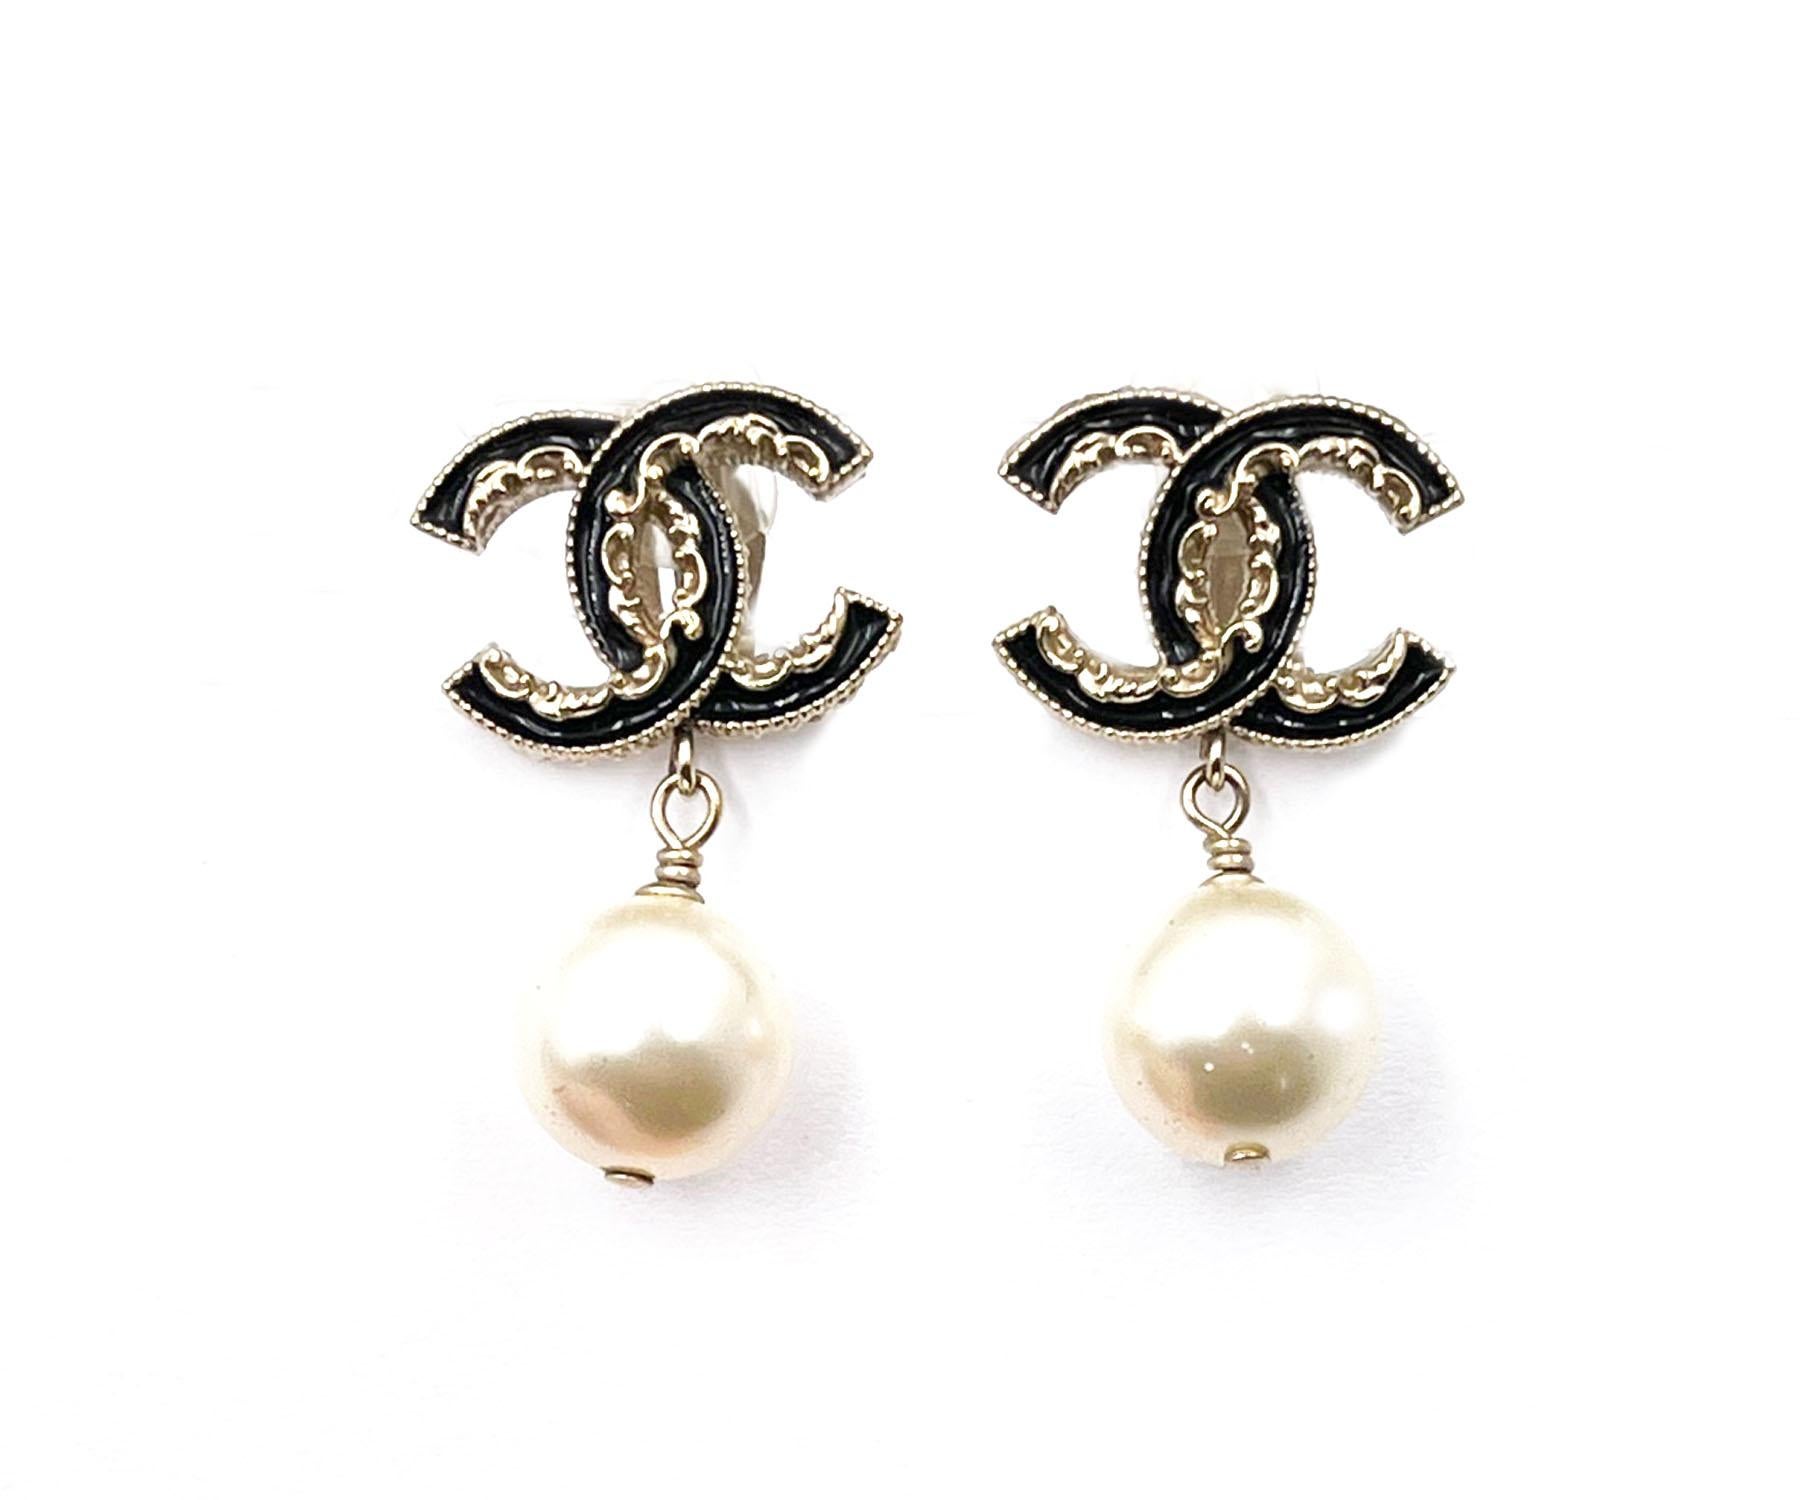 Chanel Gold CC Black Ruffle Pearl Dangle Clip on Drop Earrings

* Marked 14
* Made in Italy
*Comes with the original box and pouch

- It is approximately 0.8